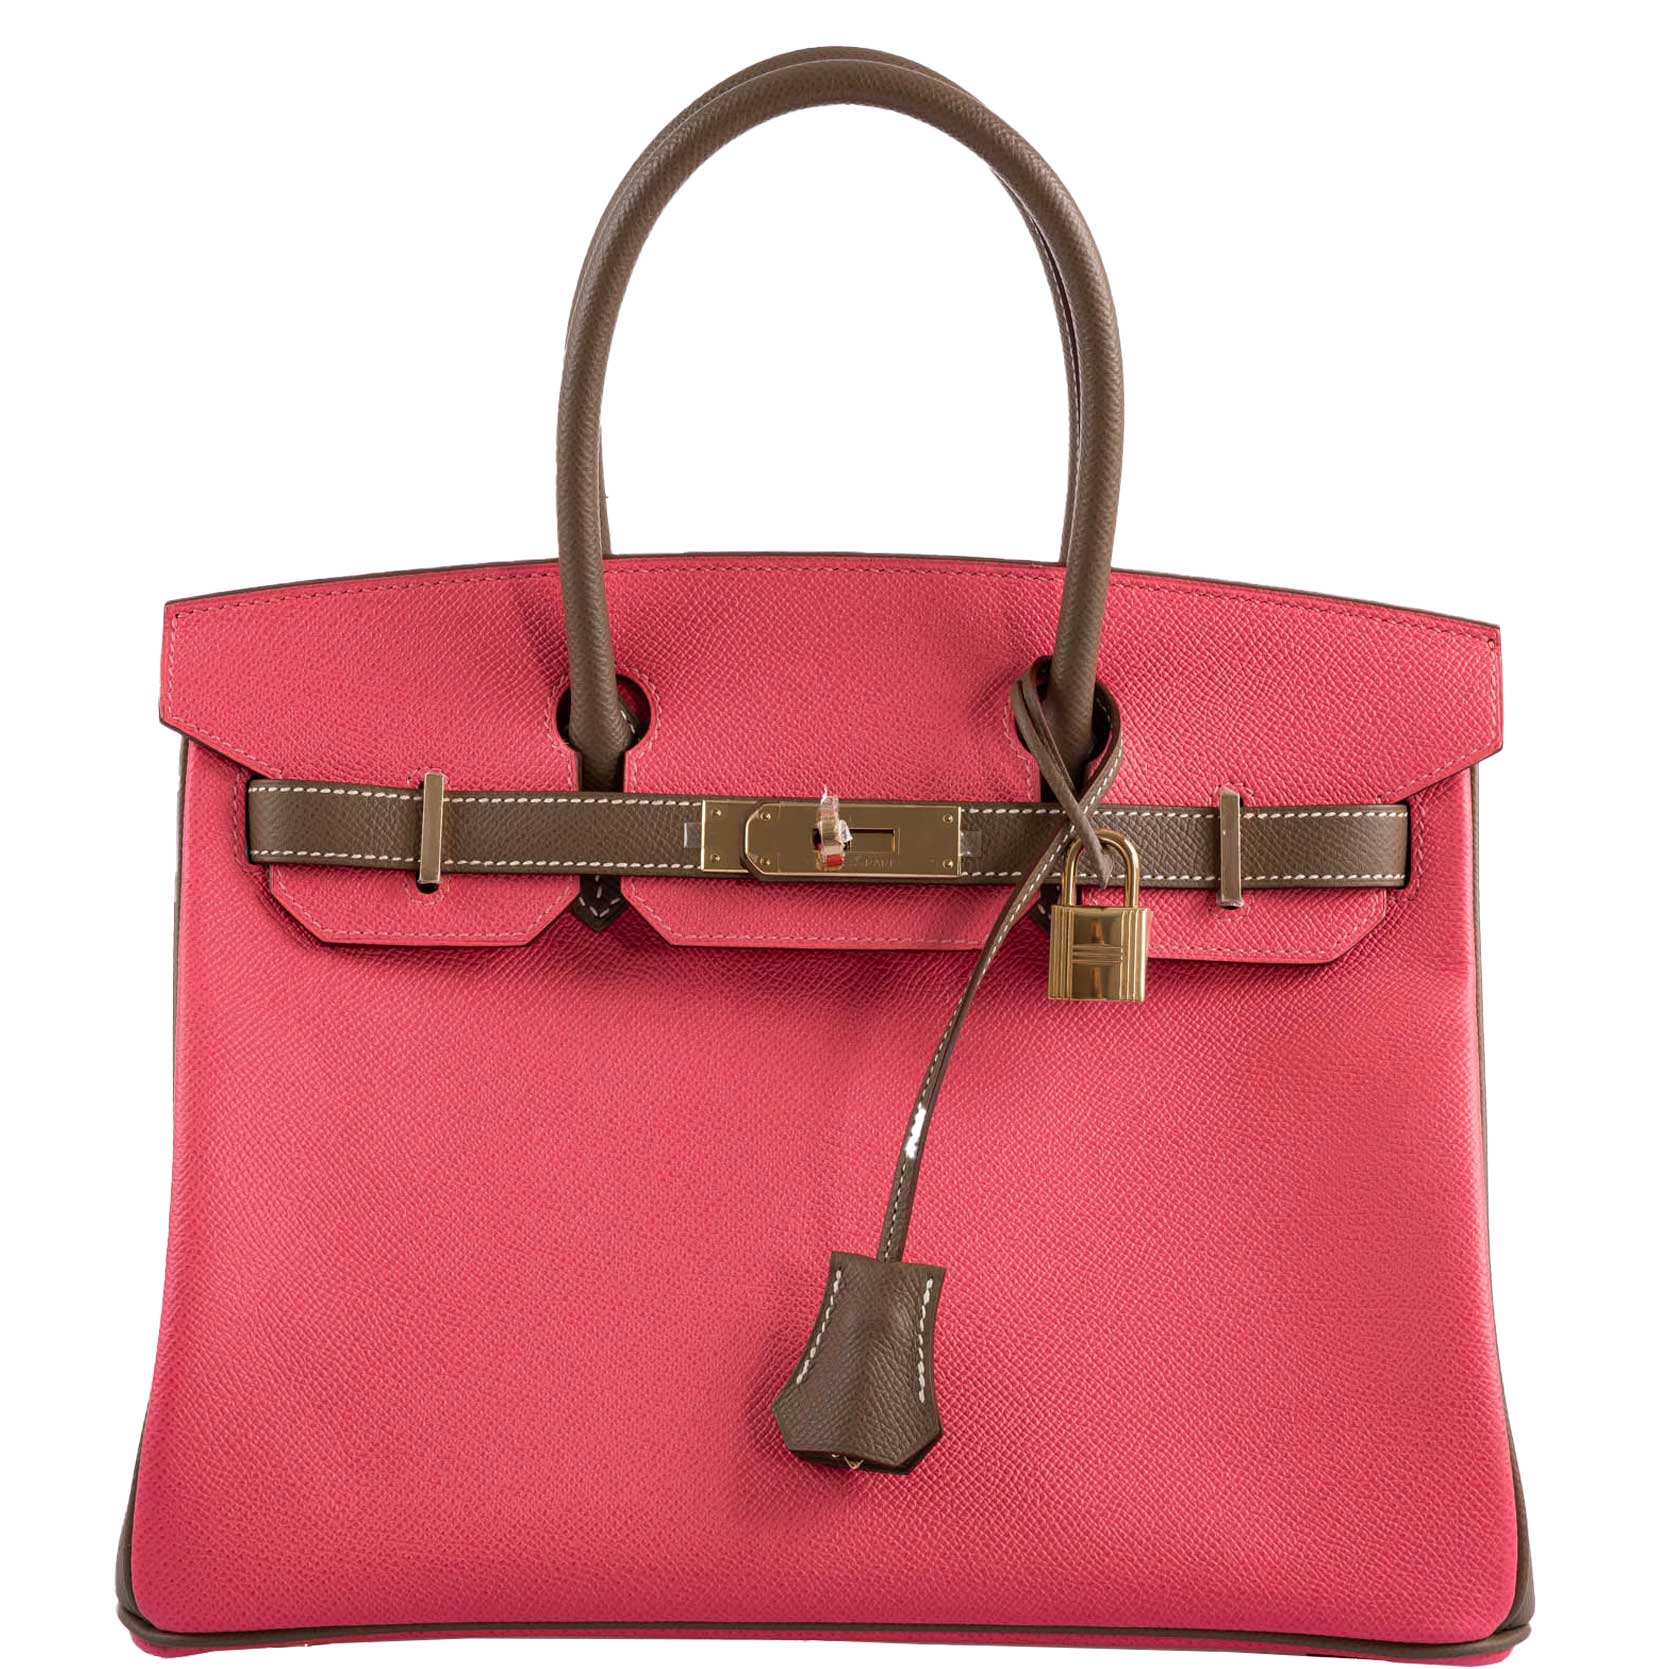 Hermès Horseshoe Stamp (HSS) Bicolor Gris Asphalte and Rose Azalee Birkin  30cm of Epsom Leather with Permabrass Hardware, Handbags & Accessories  Online, Ecommerce Retail